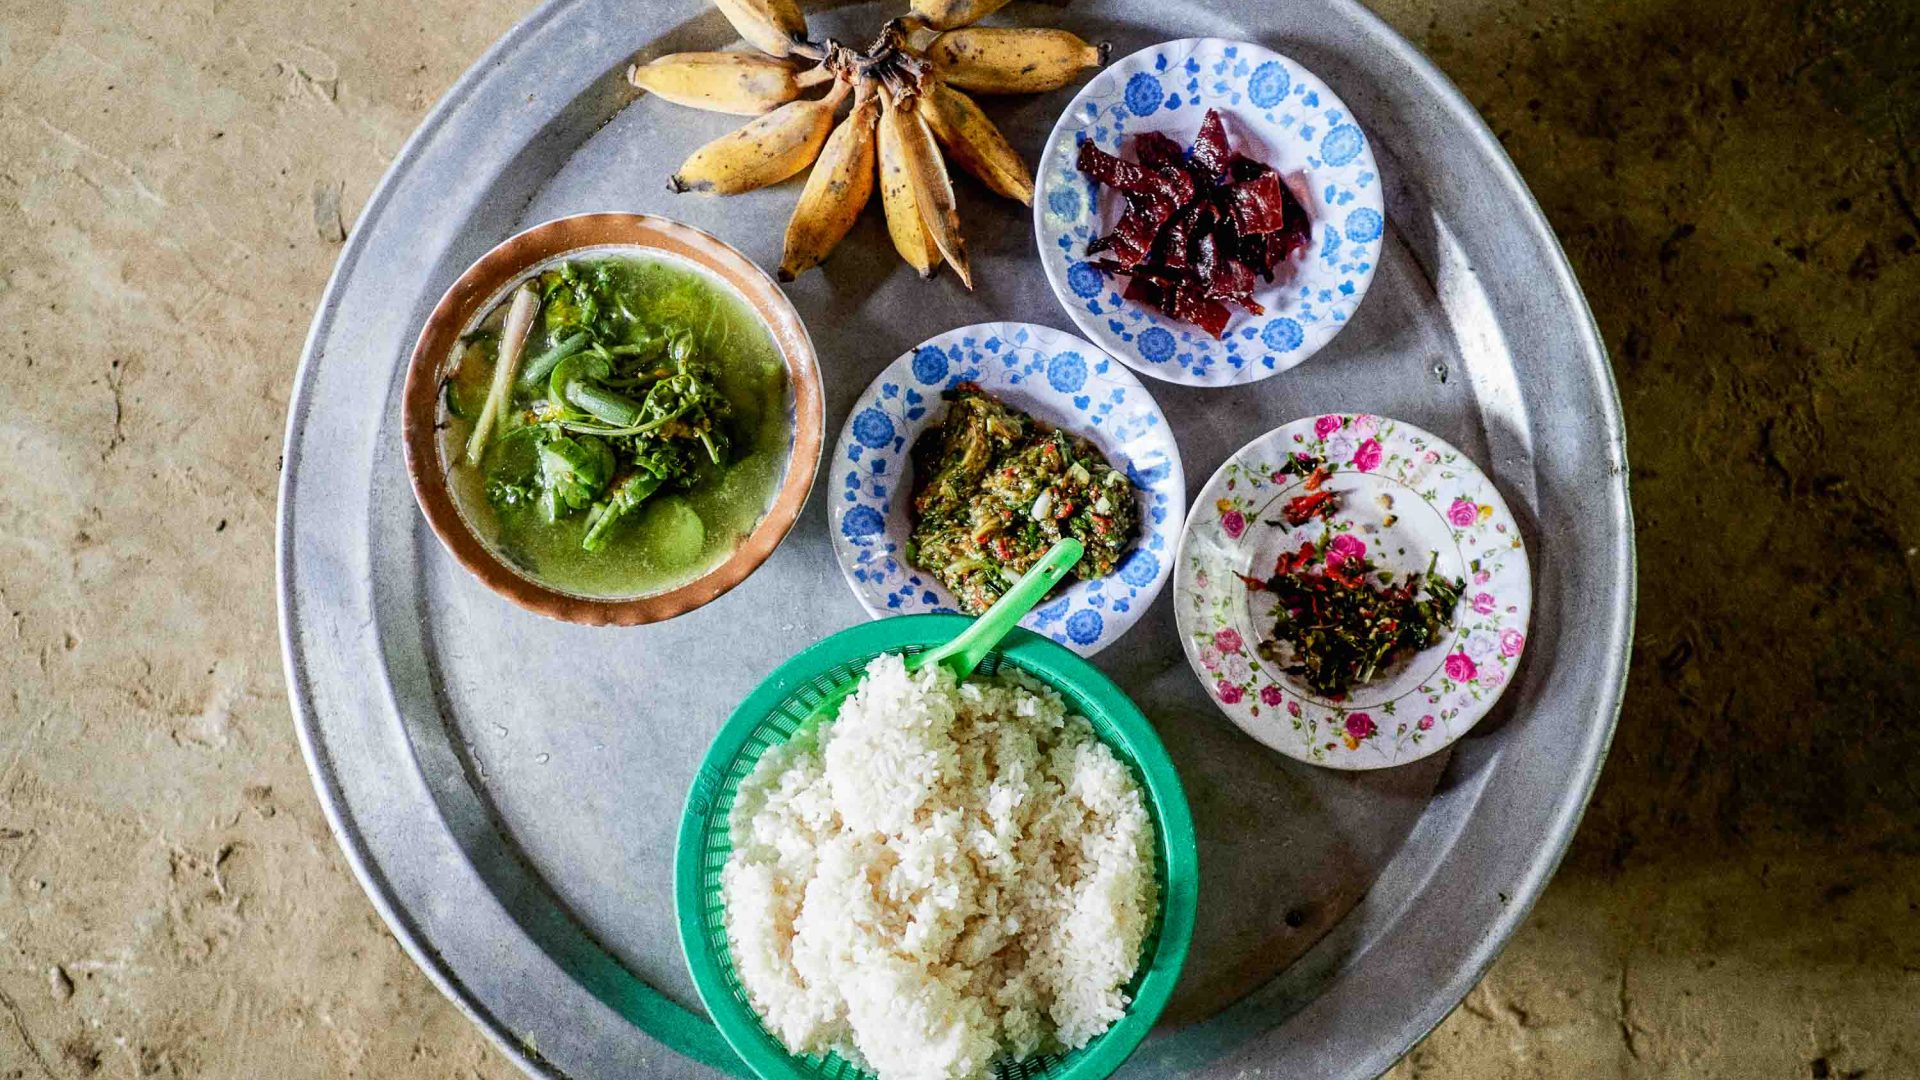 A traditional meal is served up in Laos.